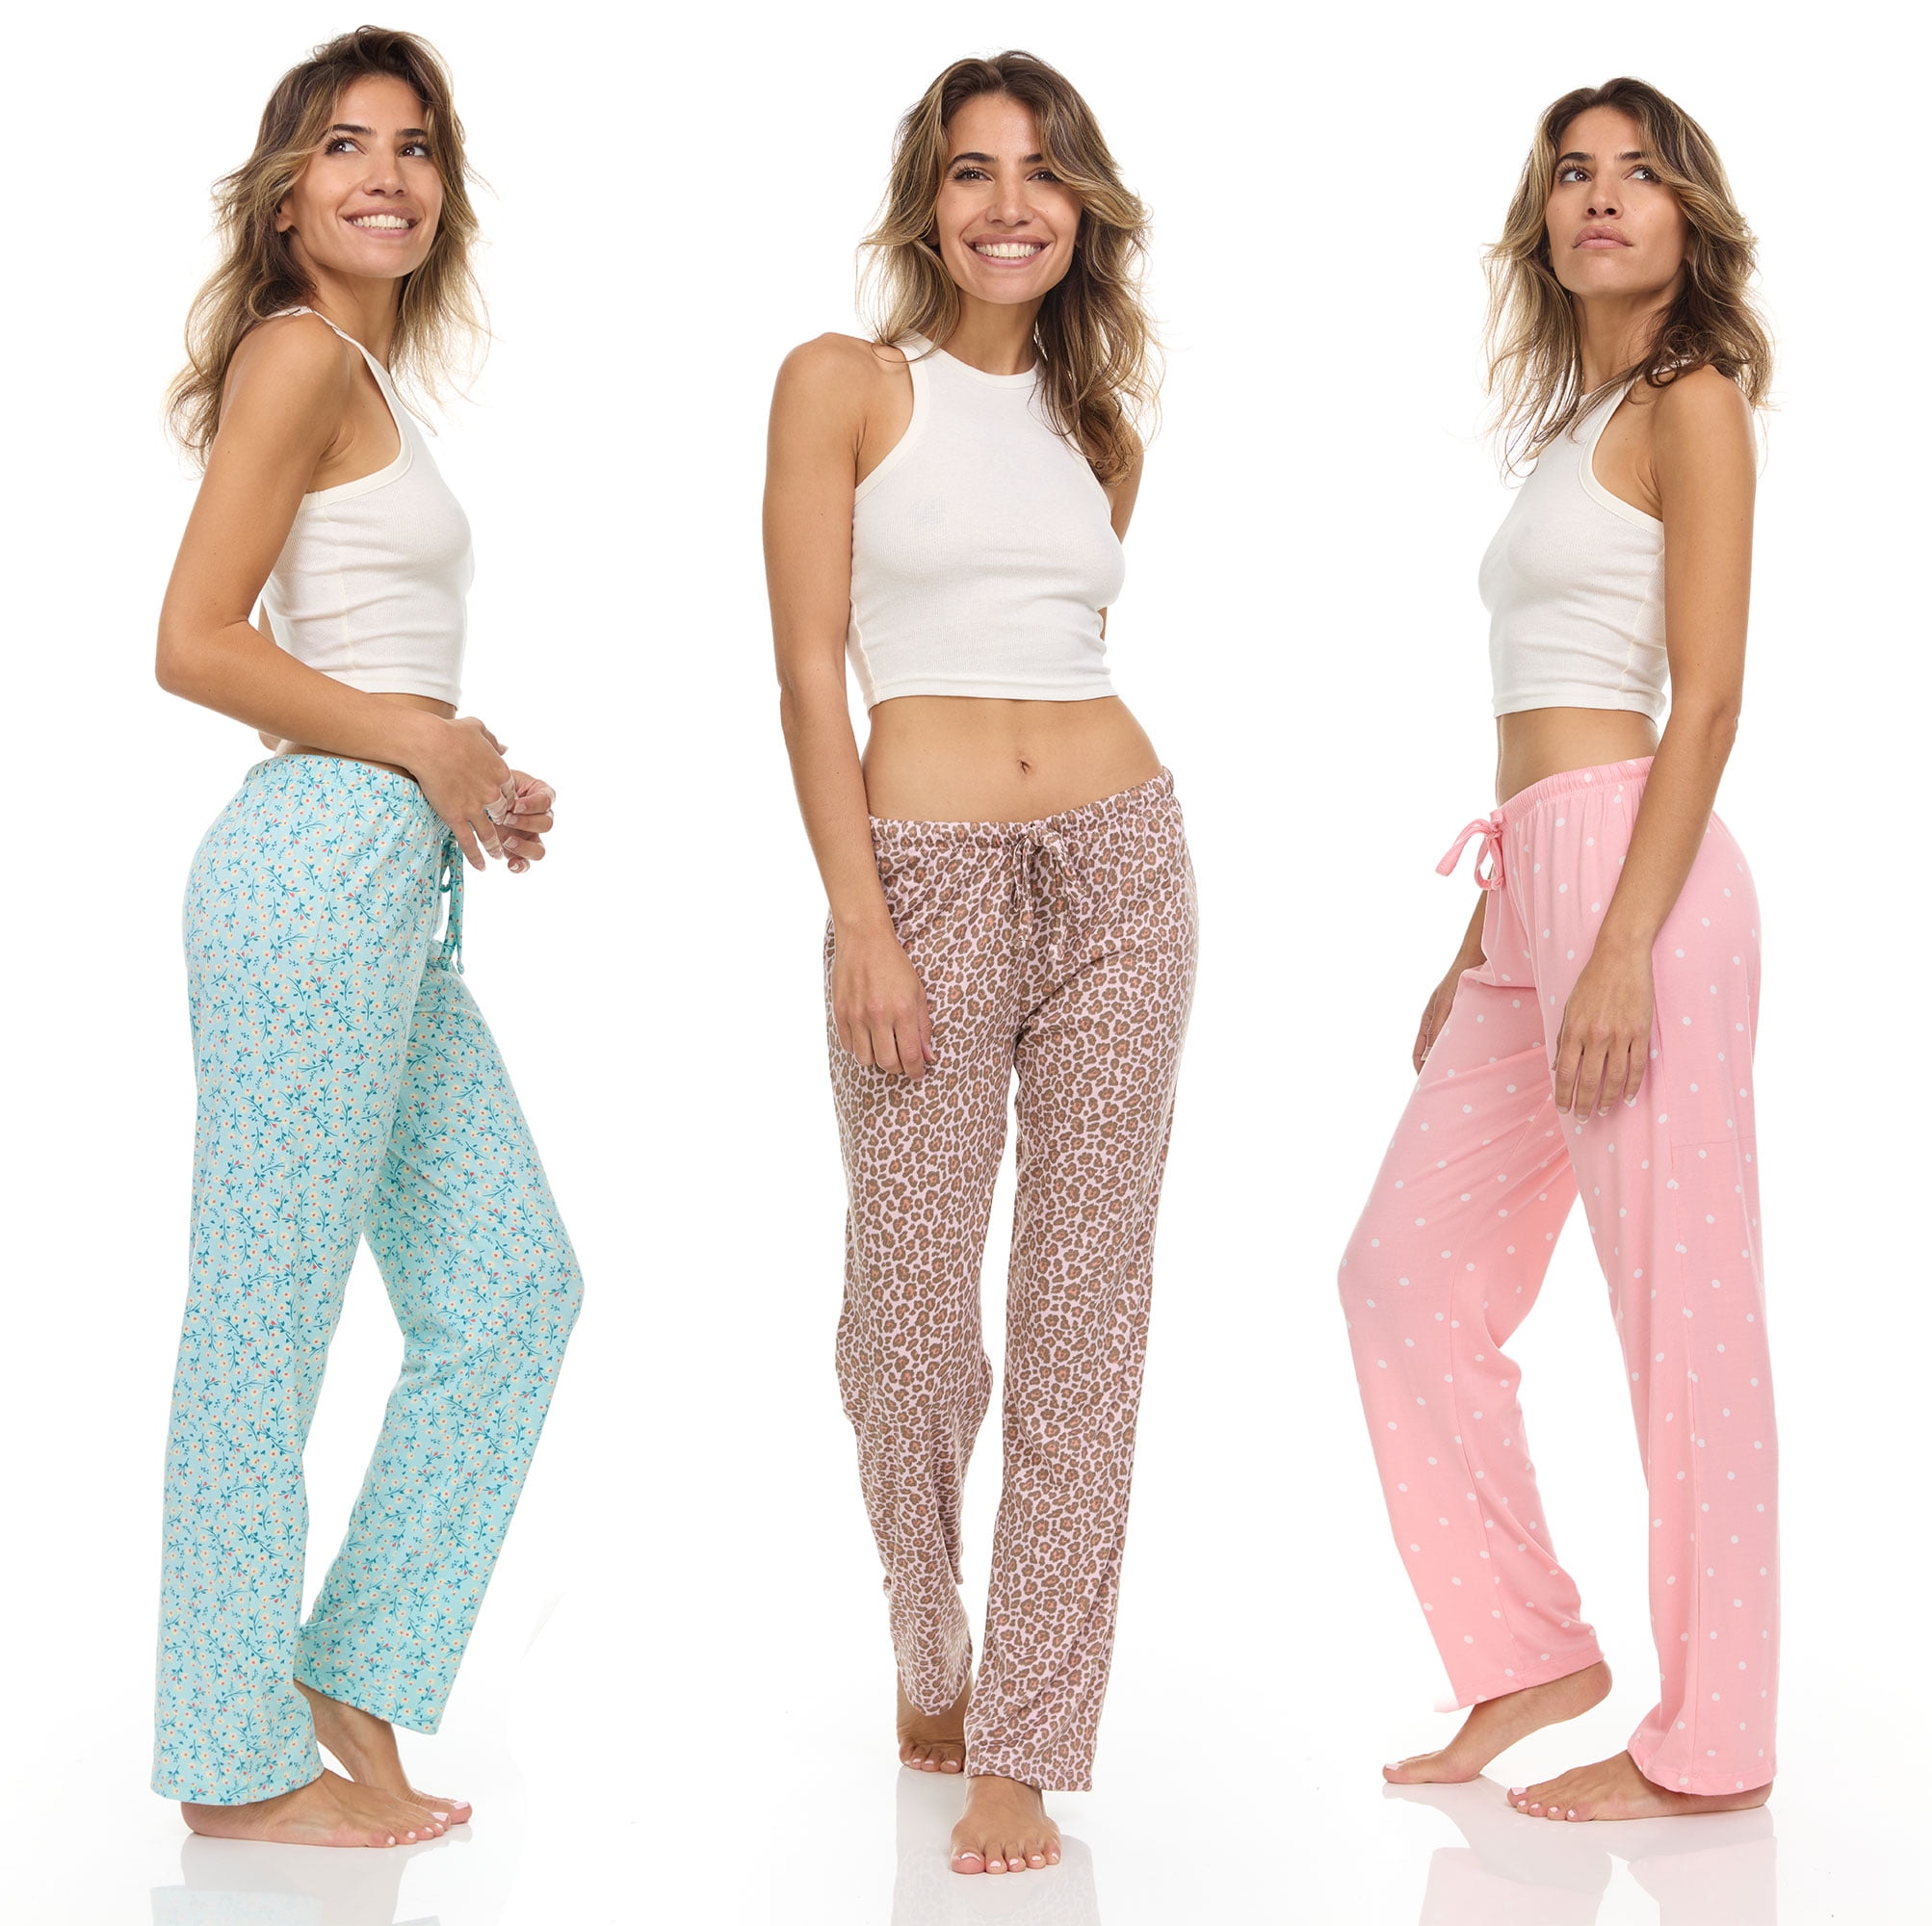 Picture of Daresay PJW-200-SET C-Yum Pnt-3Pk-S Womens Printed Lounge Pajama Pants, Assorted Color - Small - Pack of 3